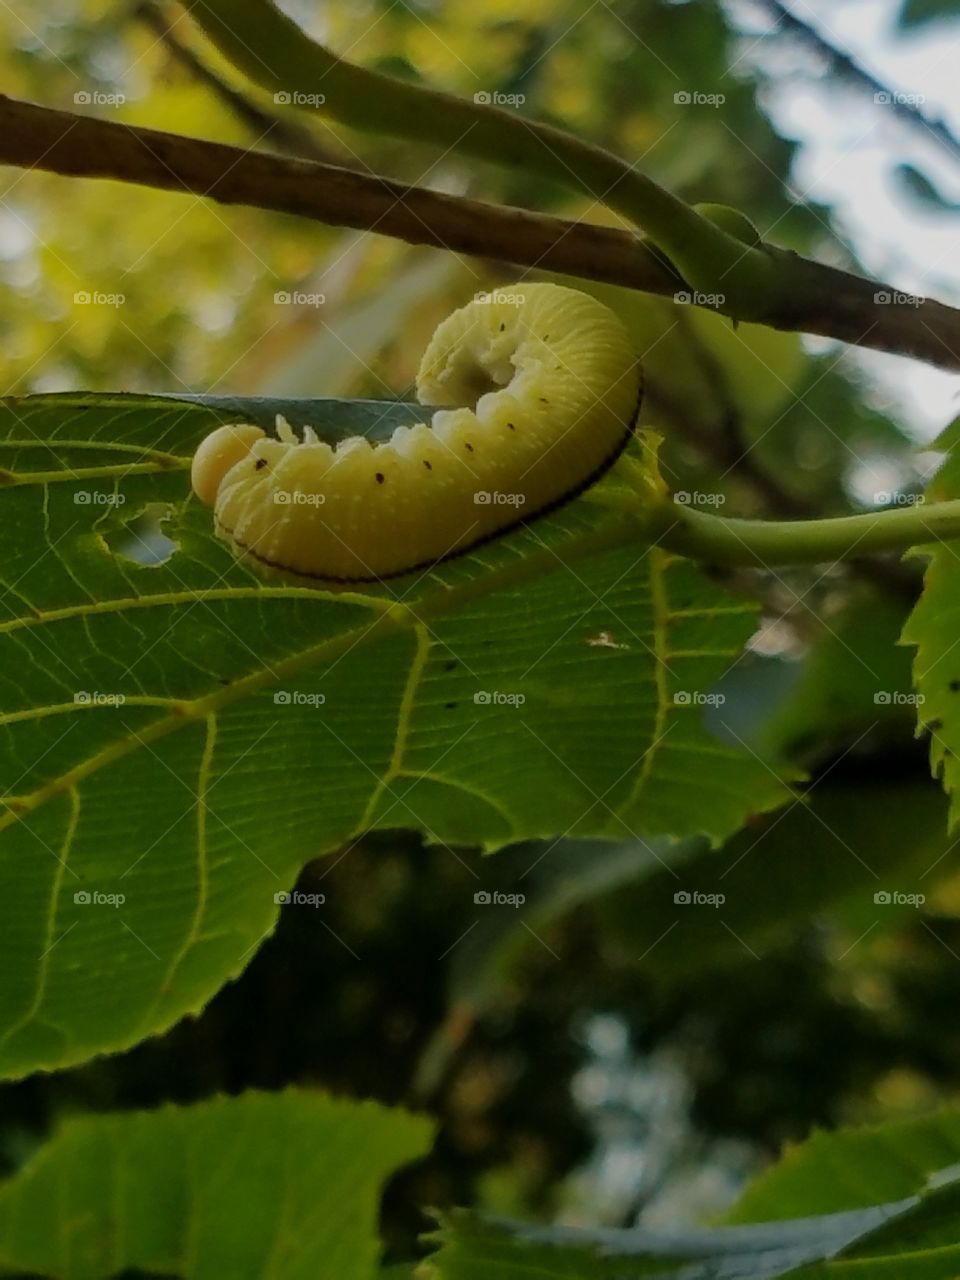 Caterpillar hanging out on a leaf